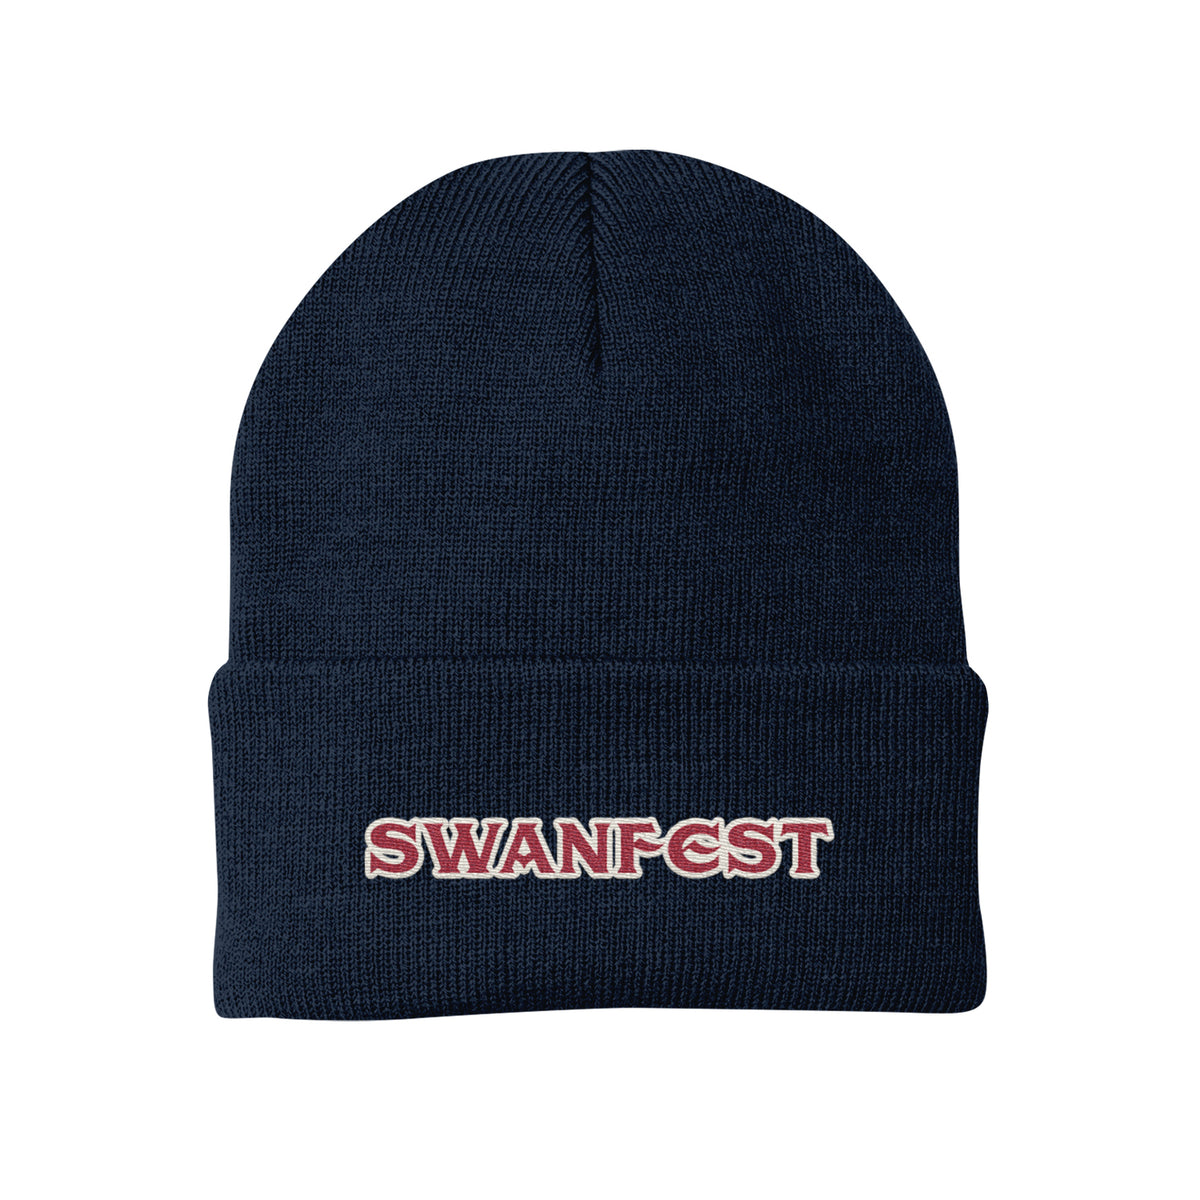 image of a navy winter beanie hat with swanfest embroidered on the cuff in red with a white outline.